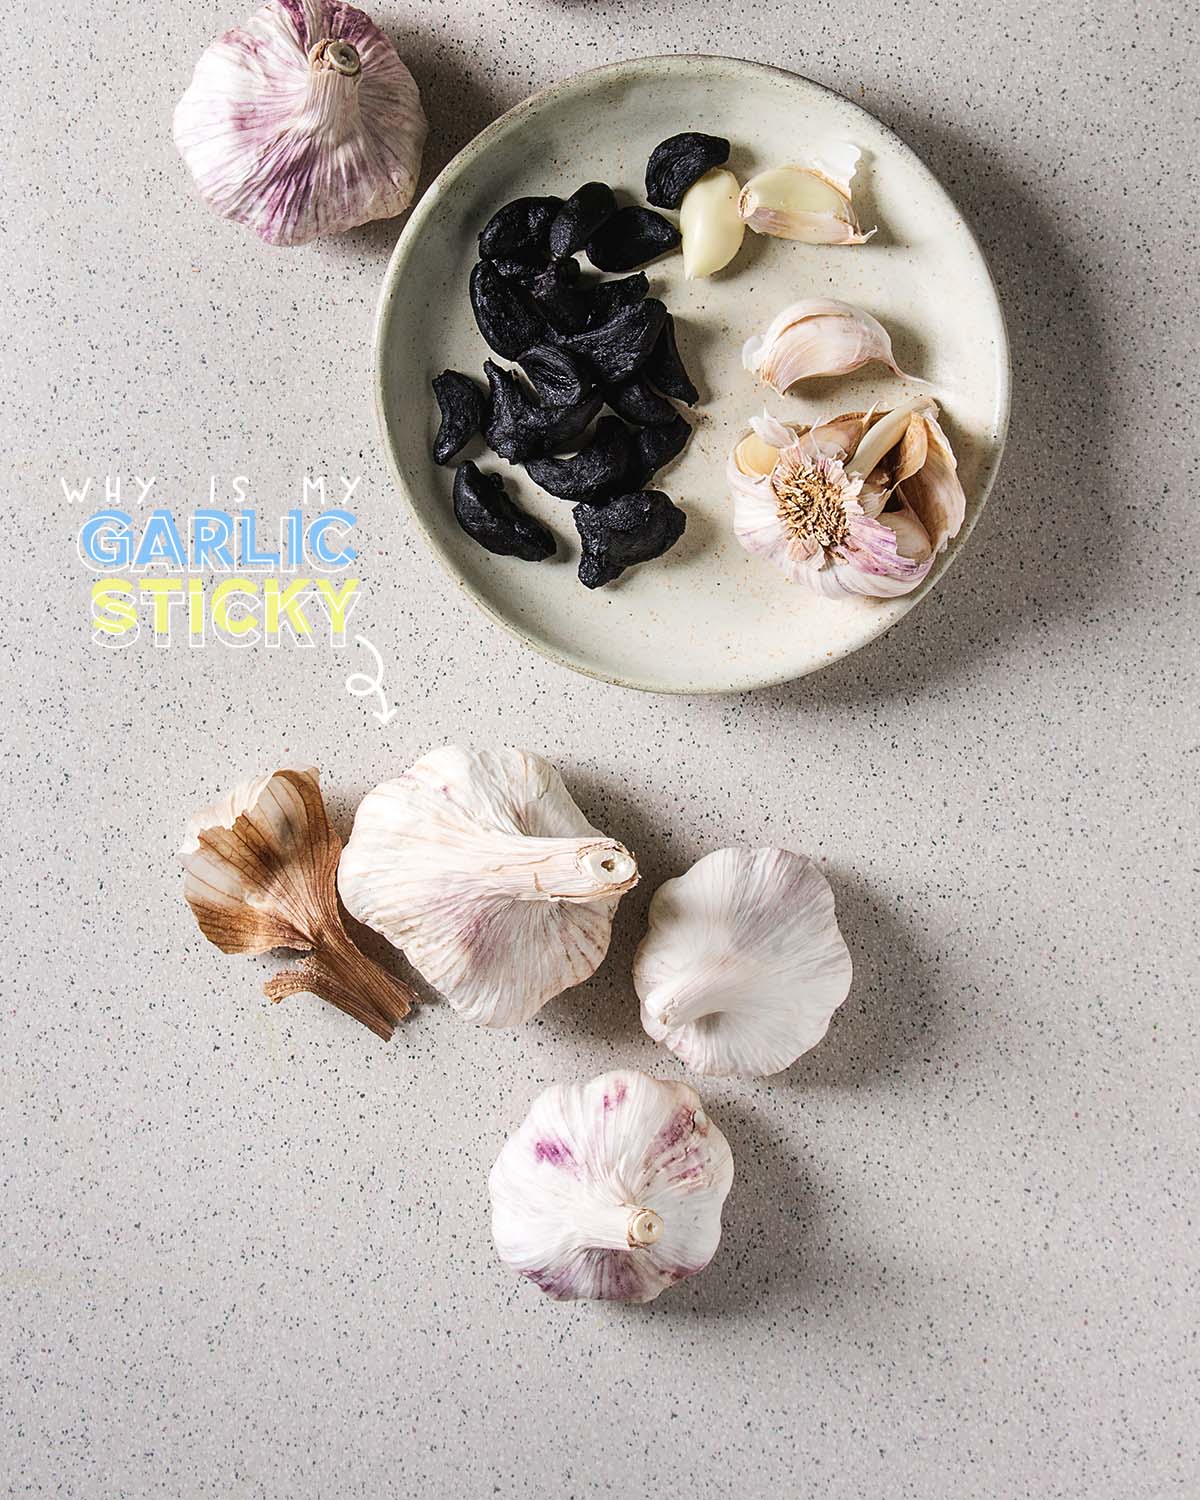 Garlic is sticky by nature. That signature stickiness results from so many factors, ranging from the type of garlic to its growing environment.